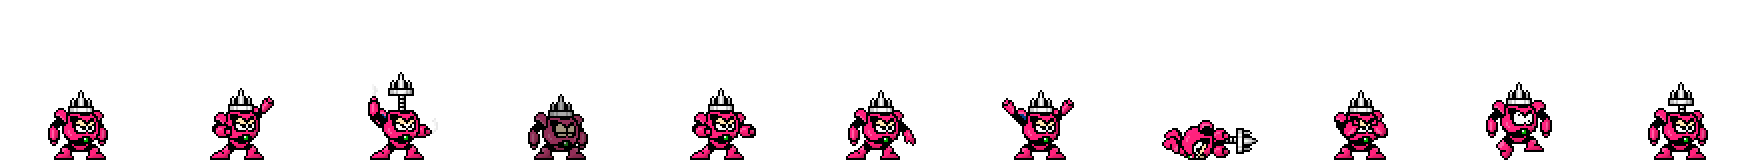 Needle Man (Magenta Alt) | Base Sprite Right<div style="margin-top: 4px; letting-spacing: 1px; font-size: 90%; font-family: Courier New; color: rgb(159, 150, 172);">[robot:right:base]{needle-man_alt}</div>